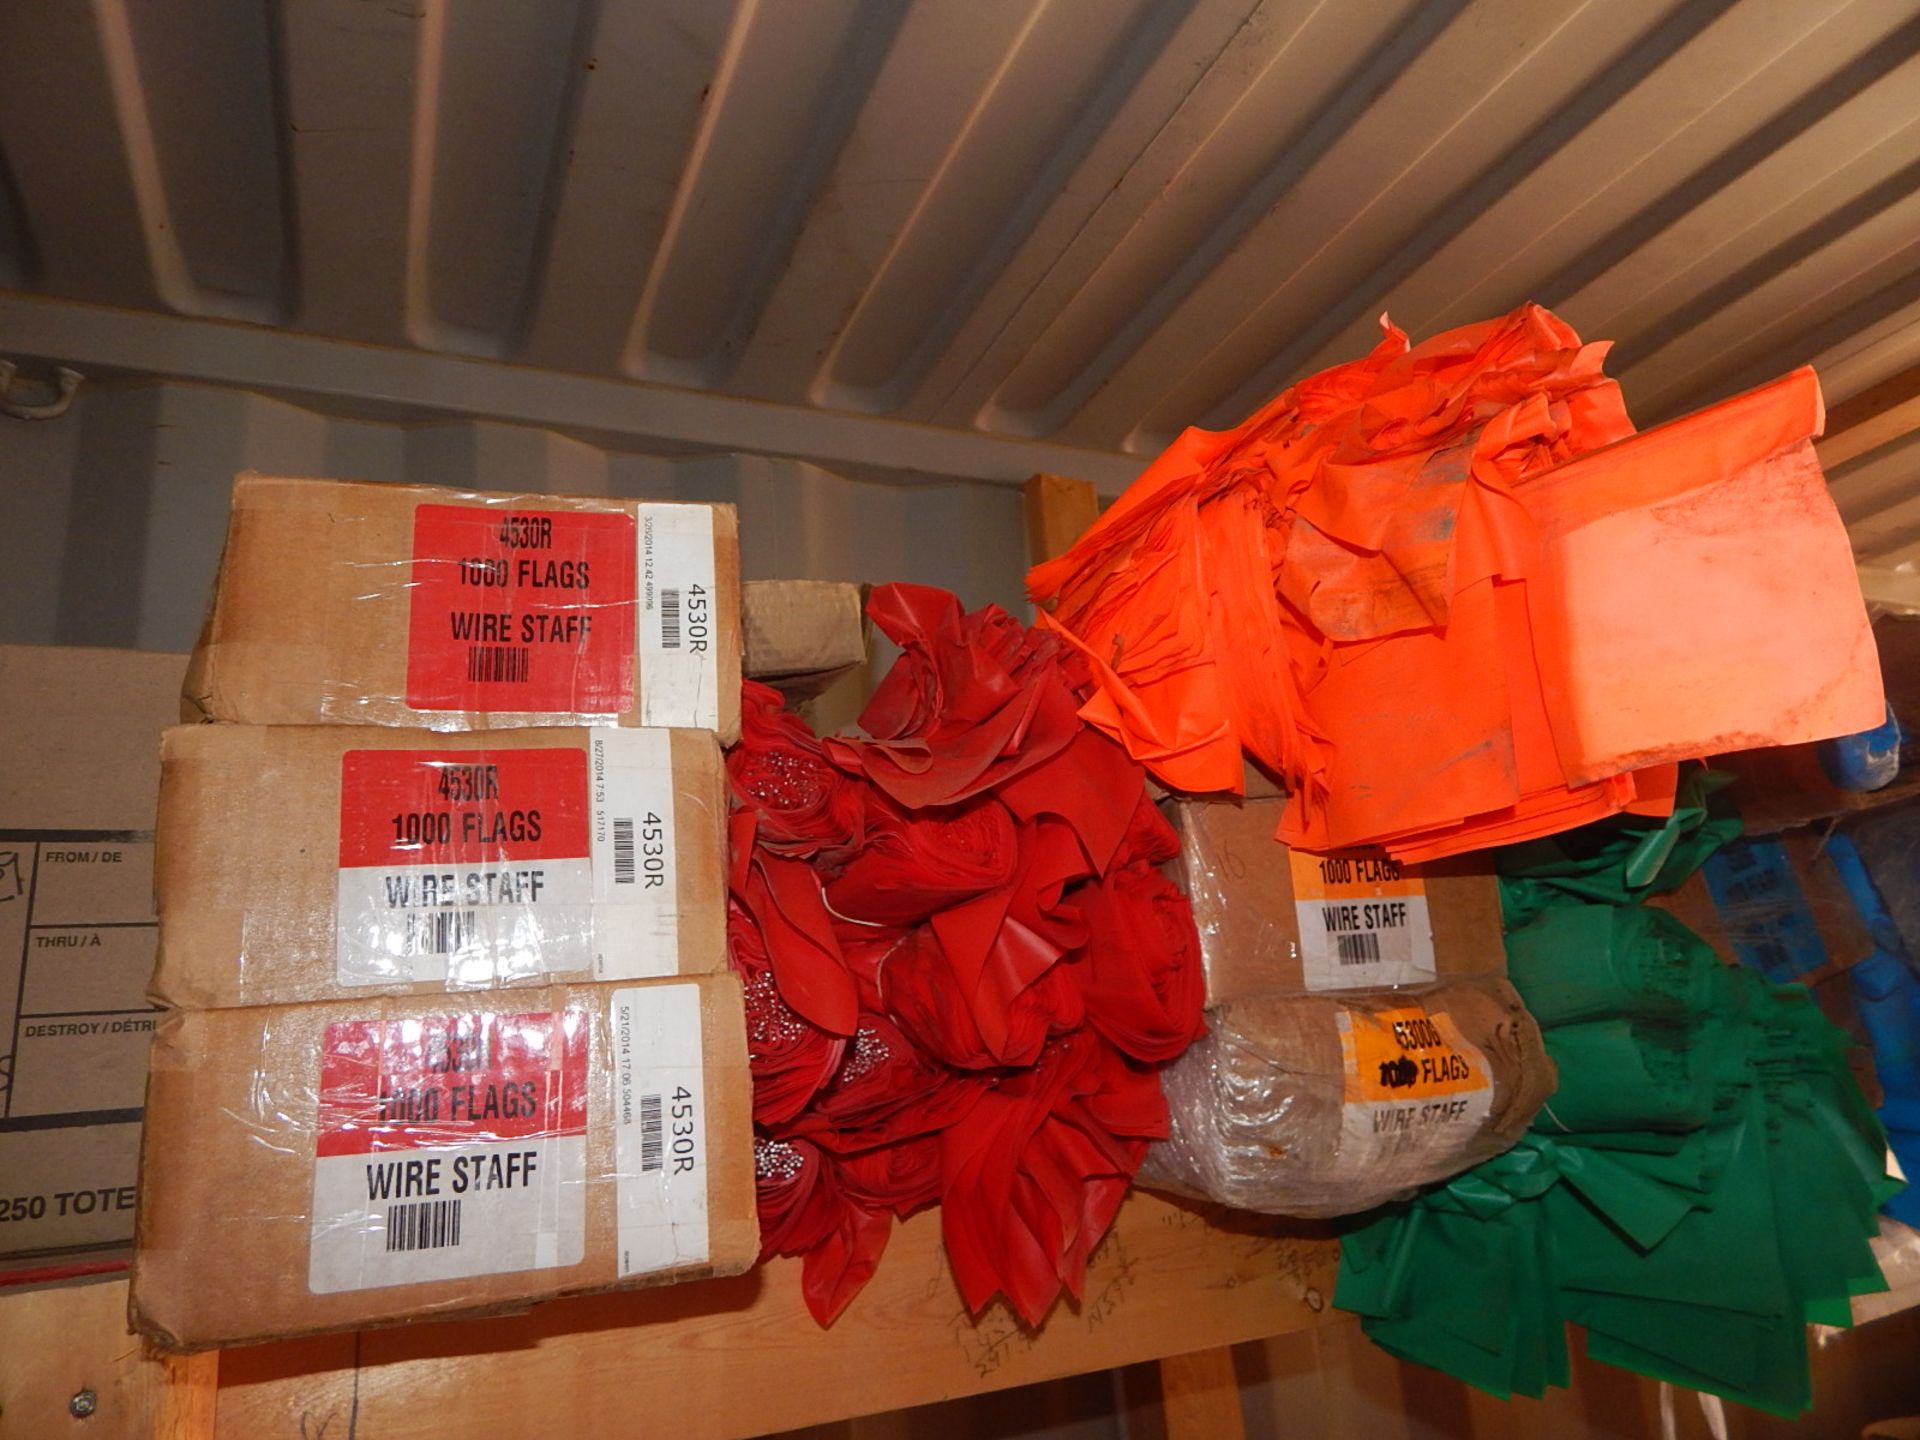 LOT/ CONTENTS OF SHELF CONSISTING OF SHRINK WRAP, SCRUBBING PADS, AND WIRE FLAGS (SC 235) - Image 3 of 3